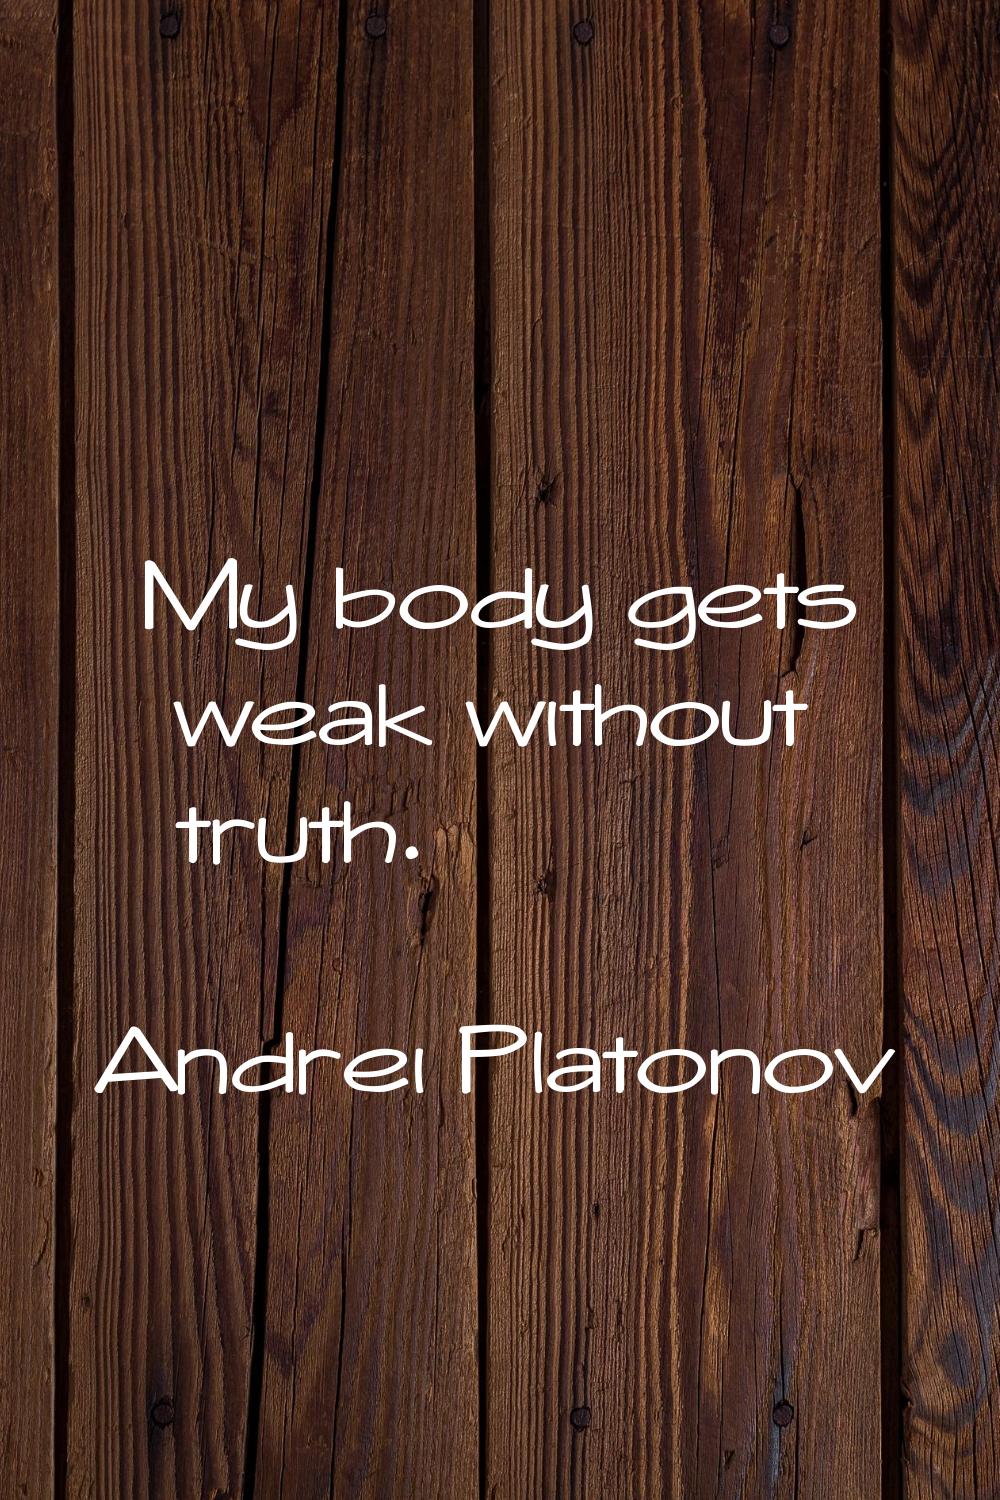 My body gets weak without truth.